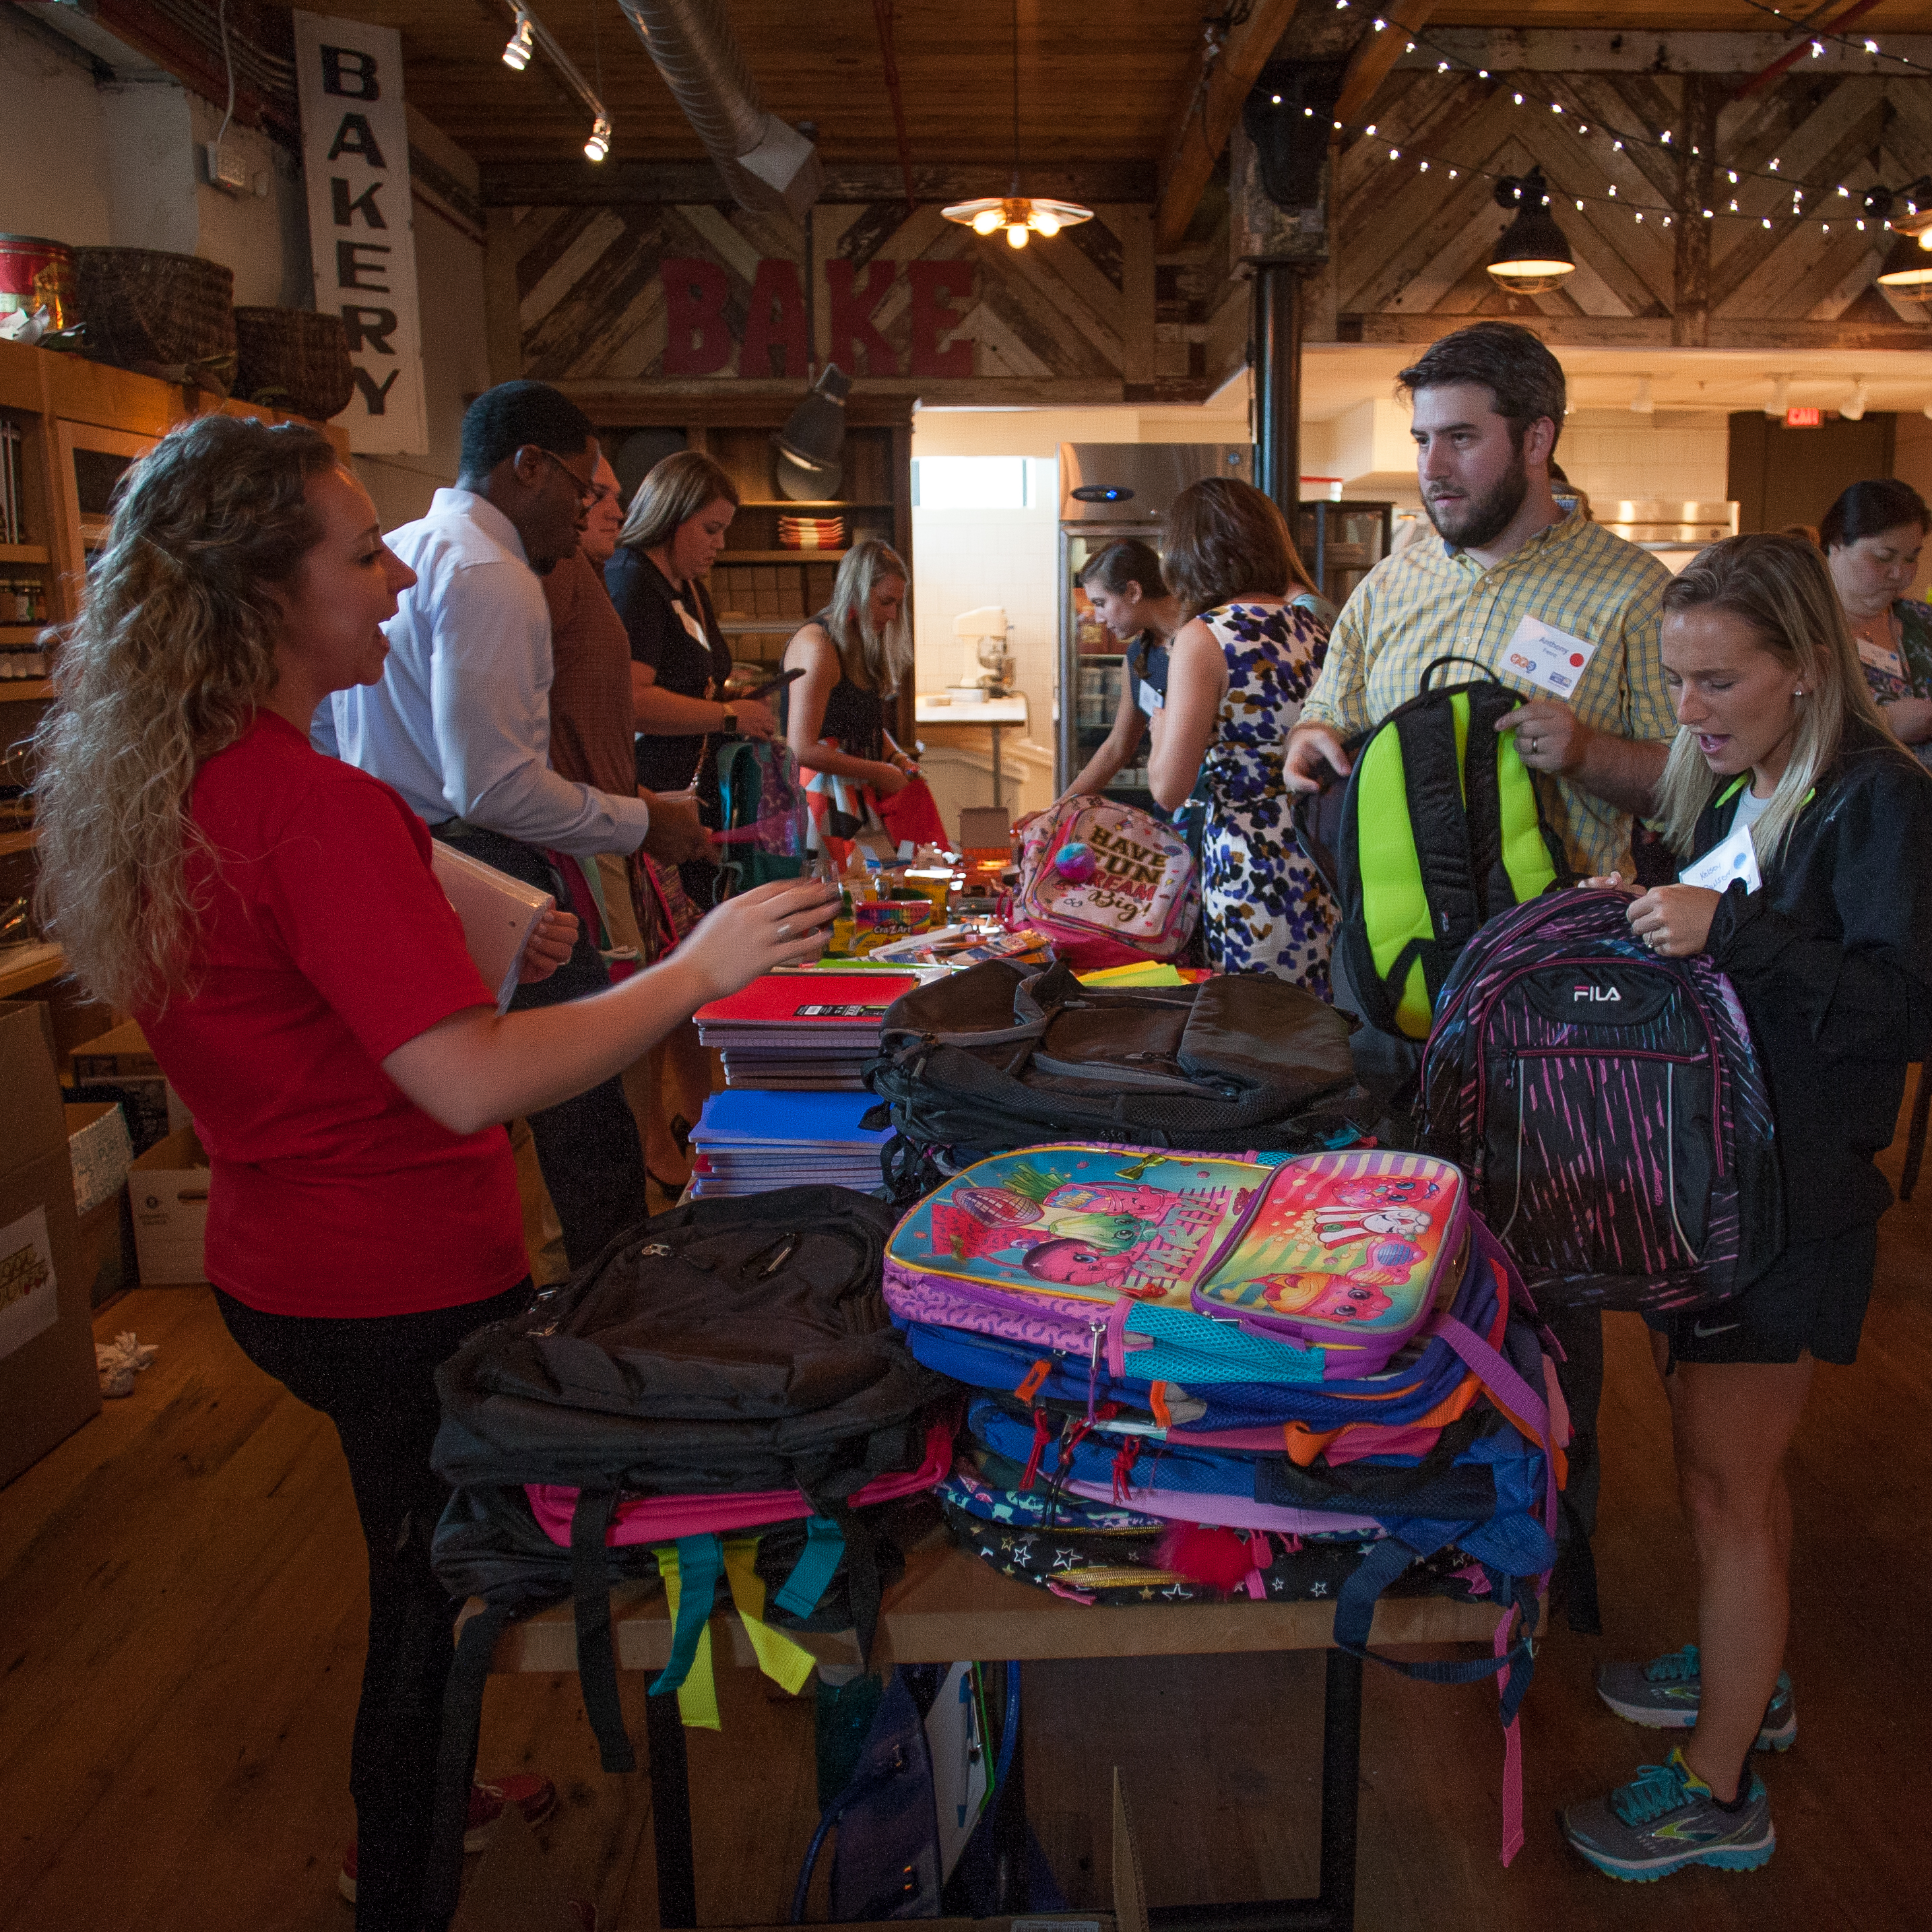 "Volunteers stand and chat on two sides of a long table. The table is covered in childrens' backpacks and school supplies, being stuffed by the volunteers."